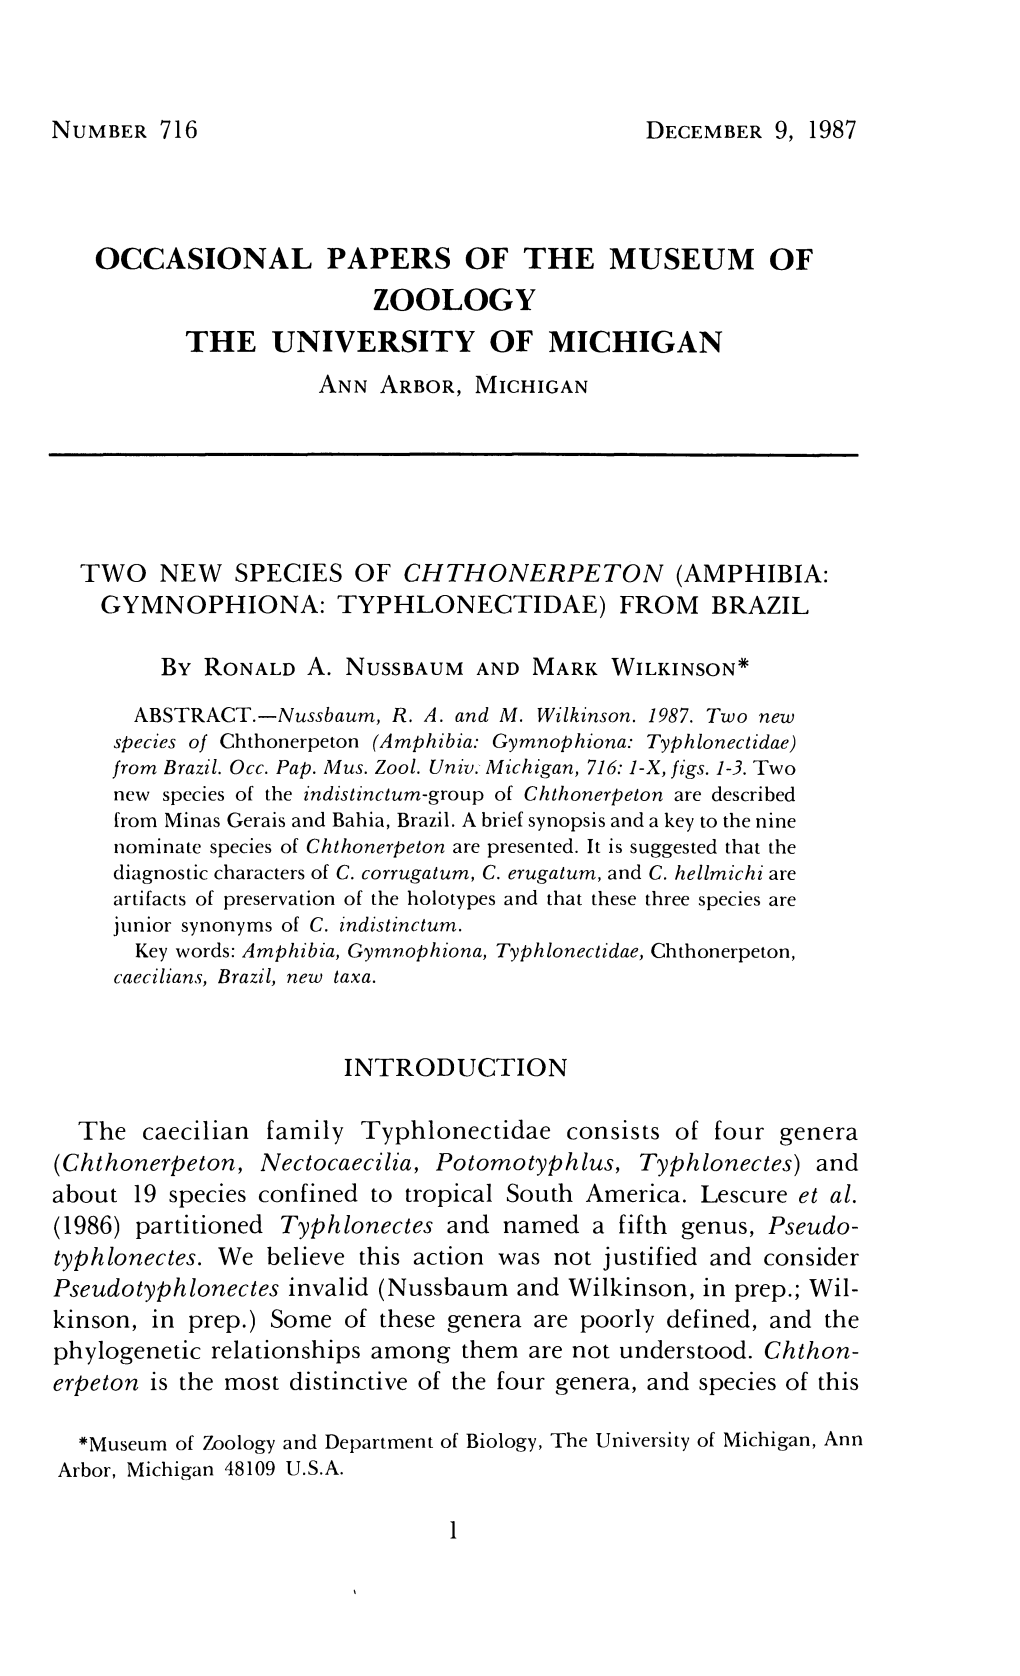 Occasional Papers of the Museum of Zoology the University of Michigan Annarbor, Michigan